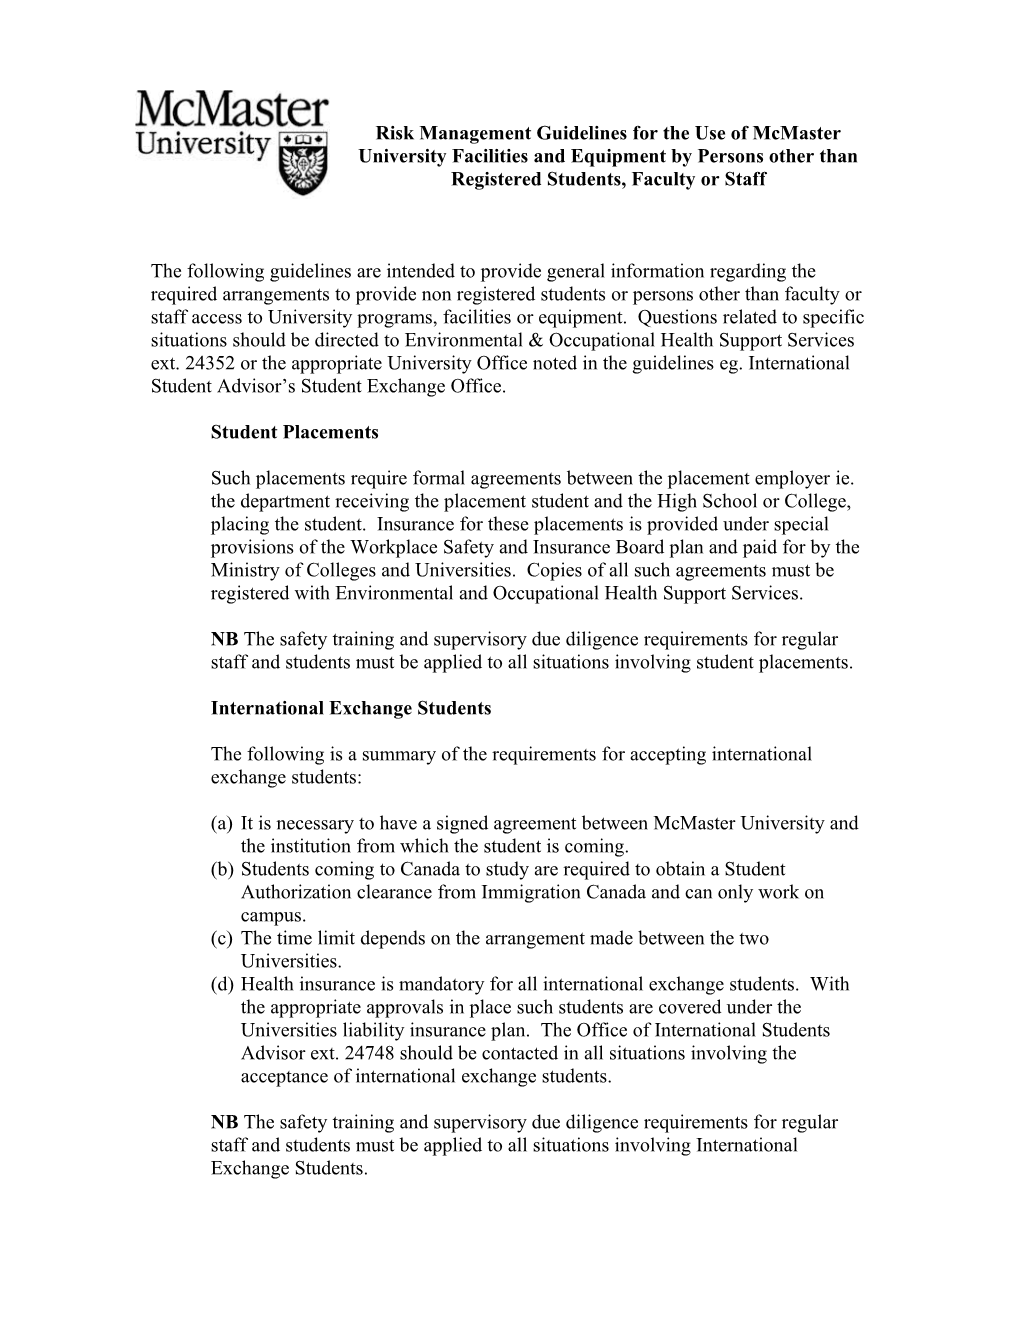 Risk Management Guidelines for the Use of Mcmaster University Facilities and Equipment